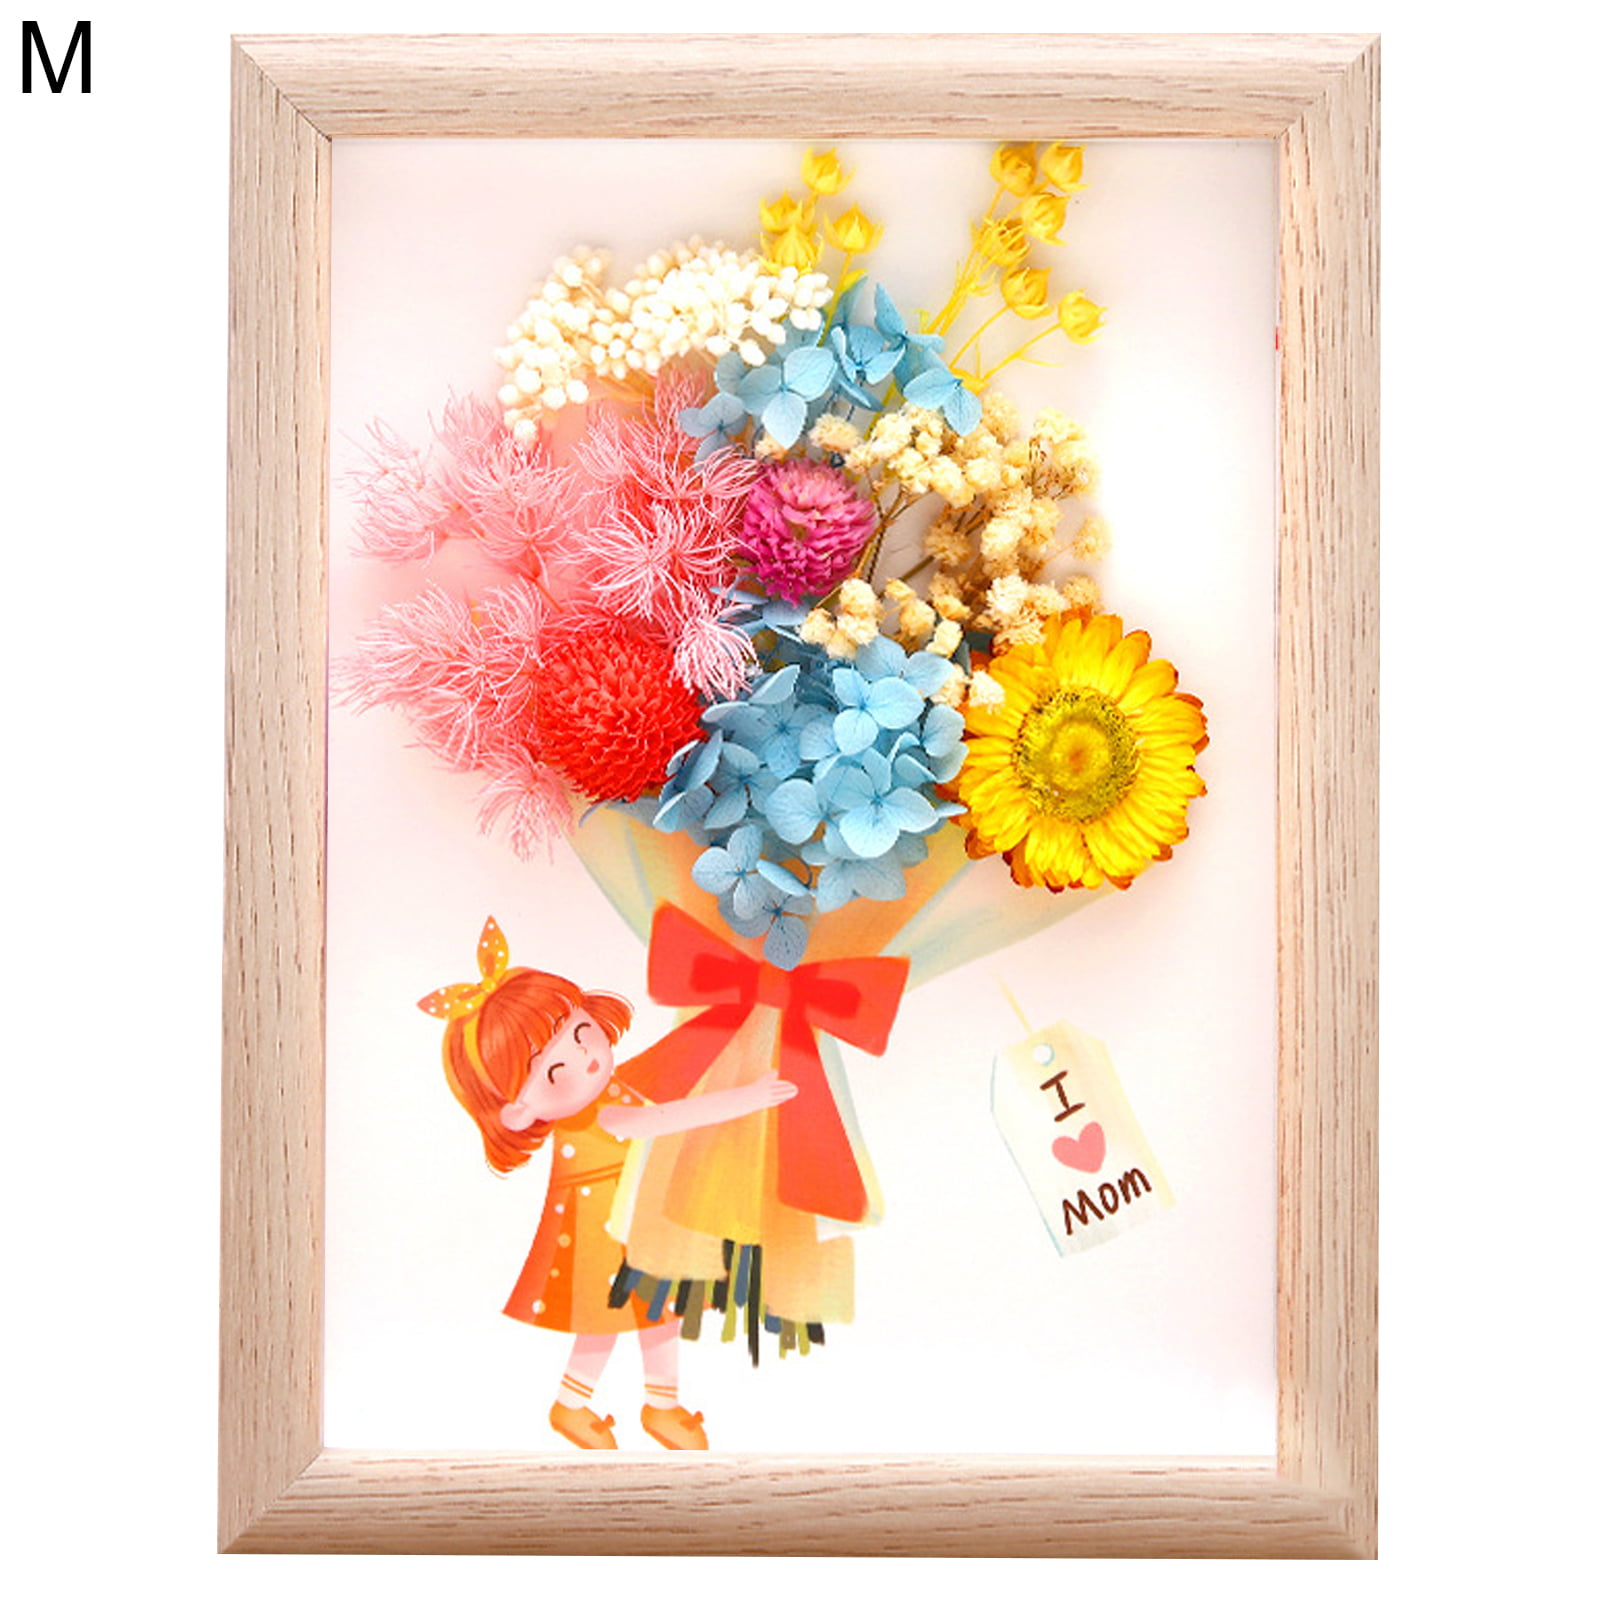 Hesroicy Photo Frame 3D Stable Wooden Dried Flower DIY Picture Frame for  Handicrafts 